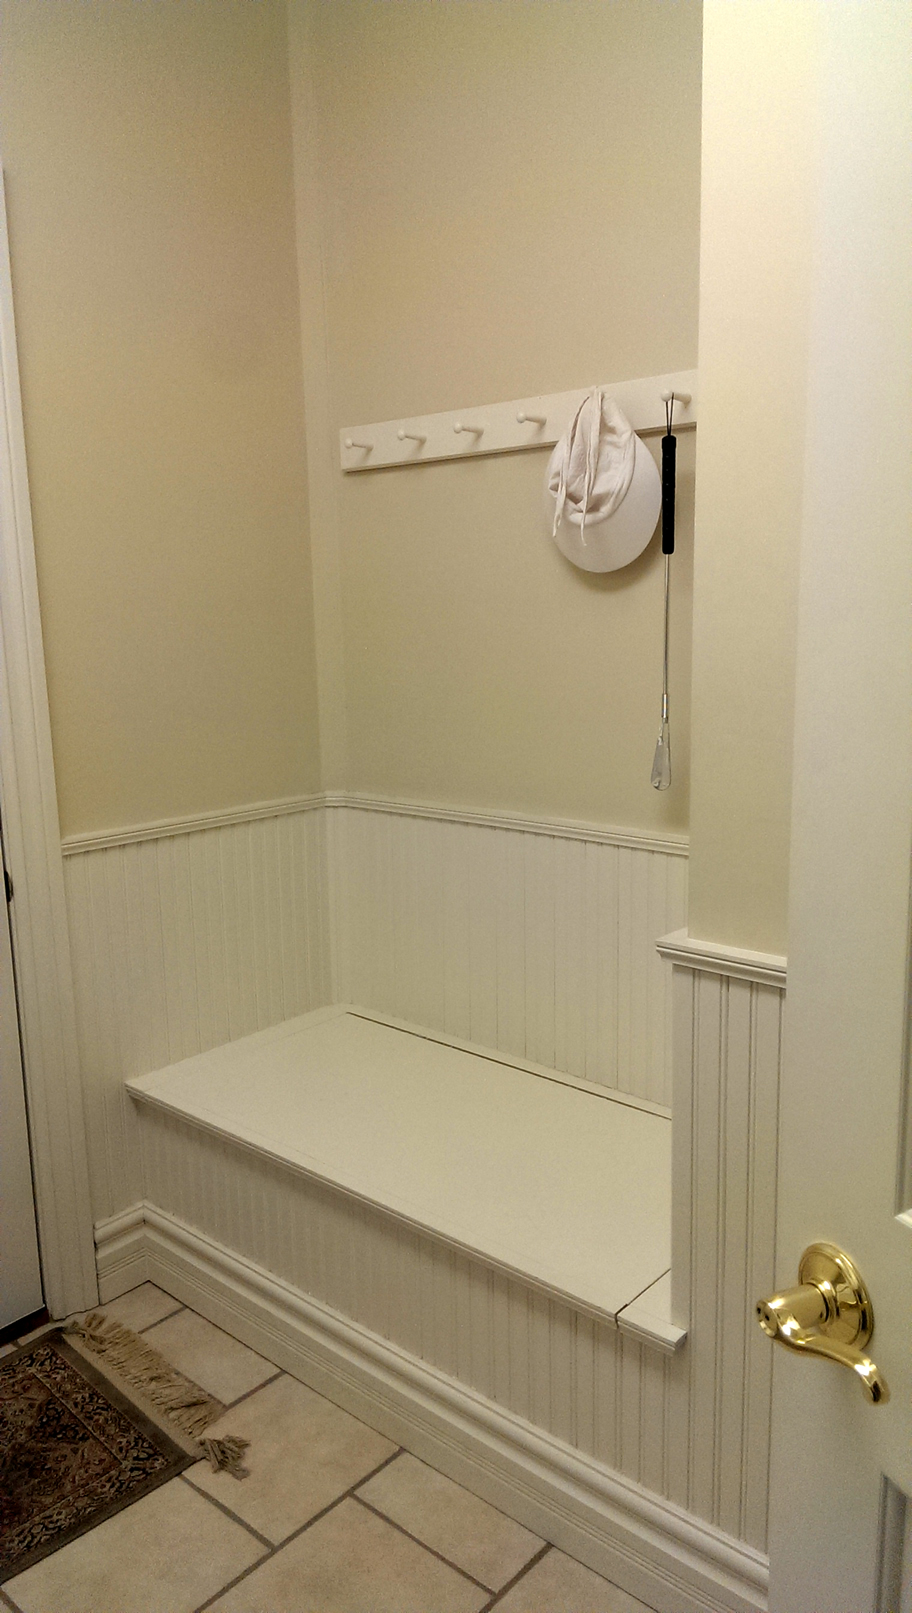 Before entry - handicap accessible remodeling